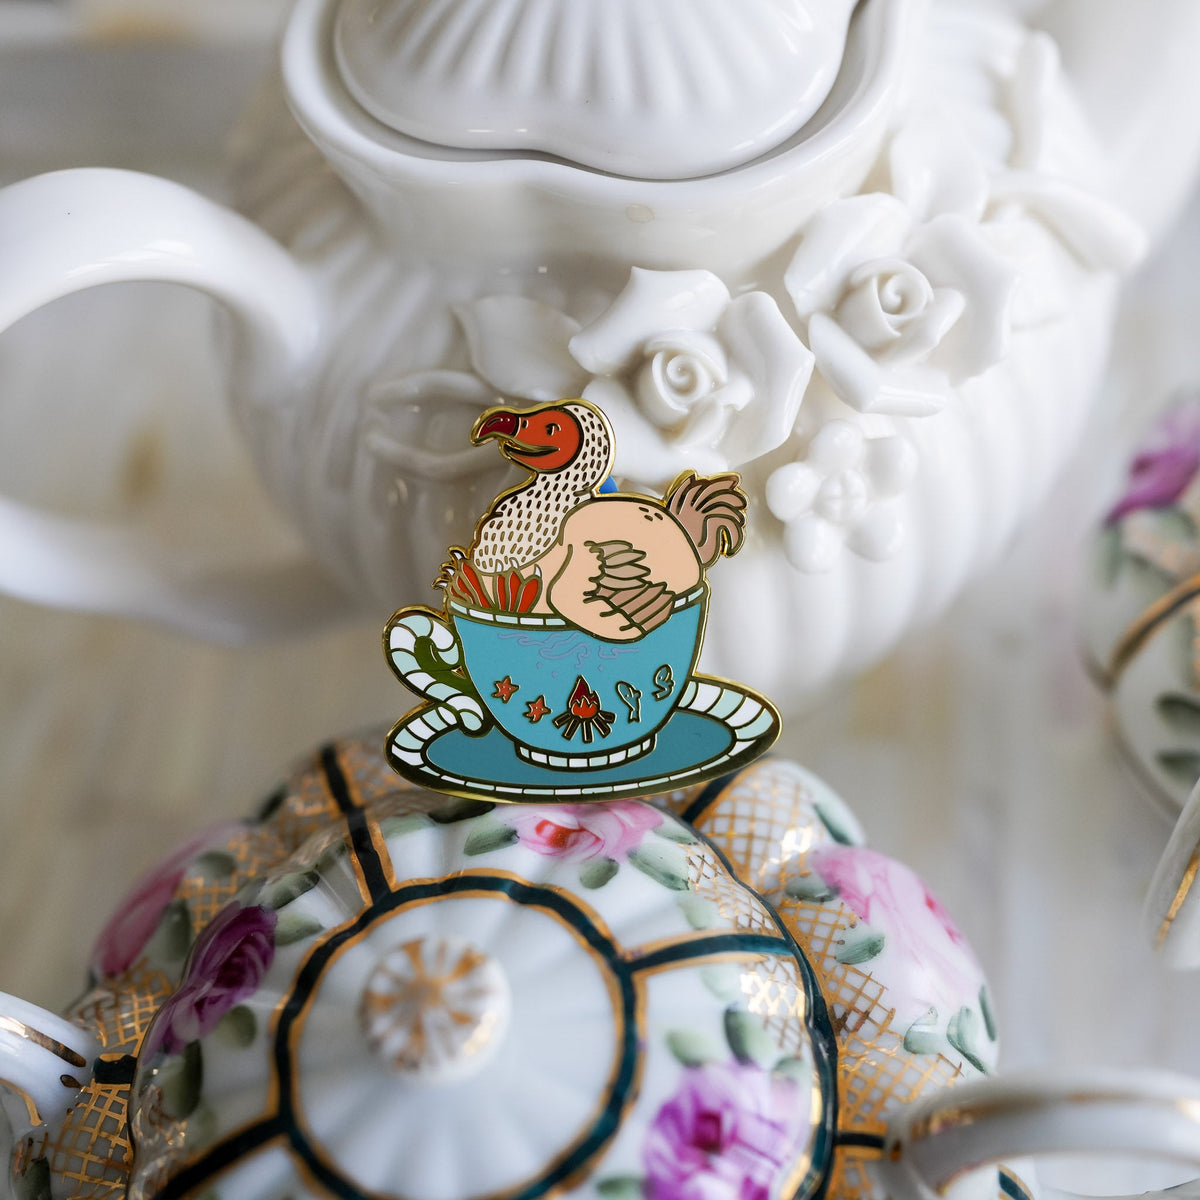 Dodo Bird Critter Collection Enamel Pin with a bird sitting inside of a teacup on top of a saucer.